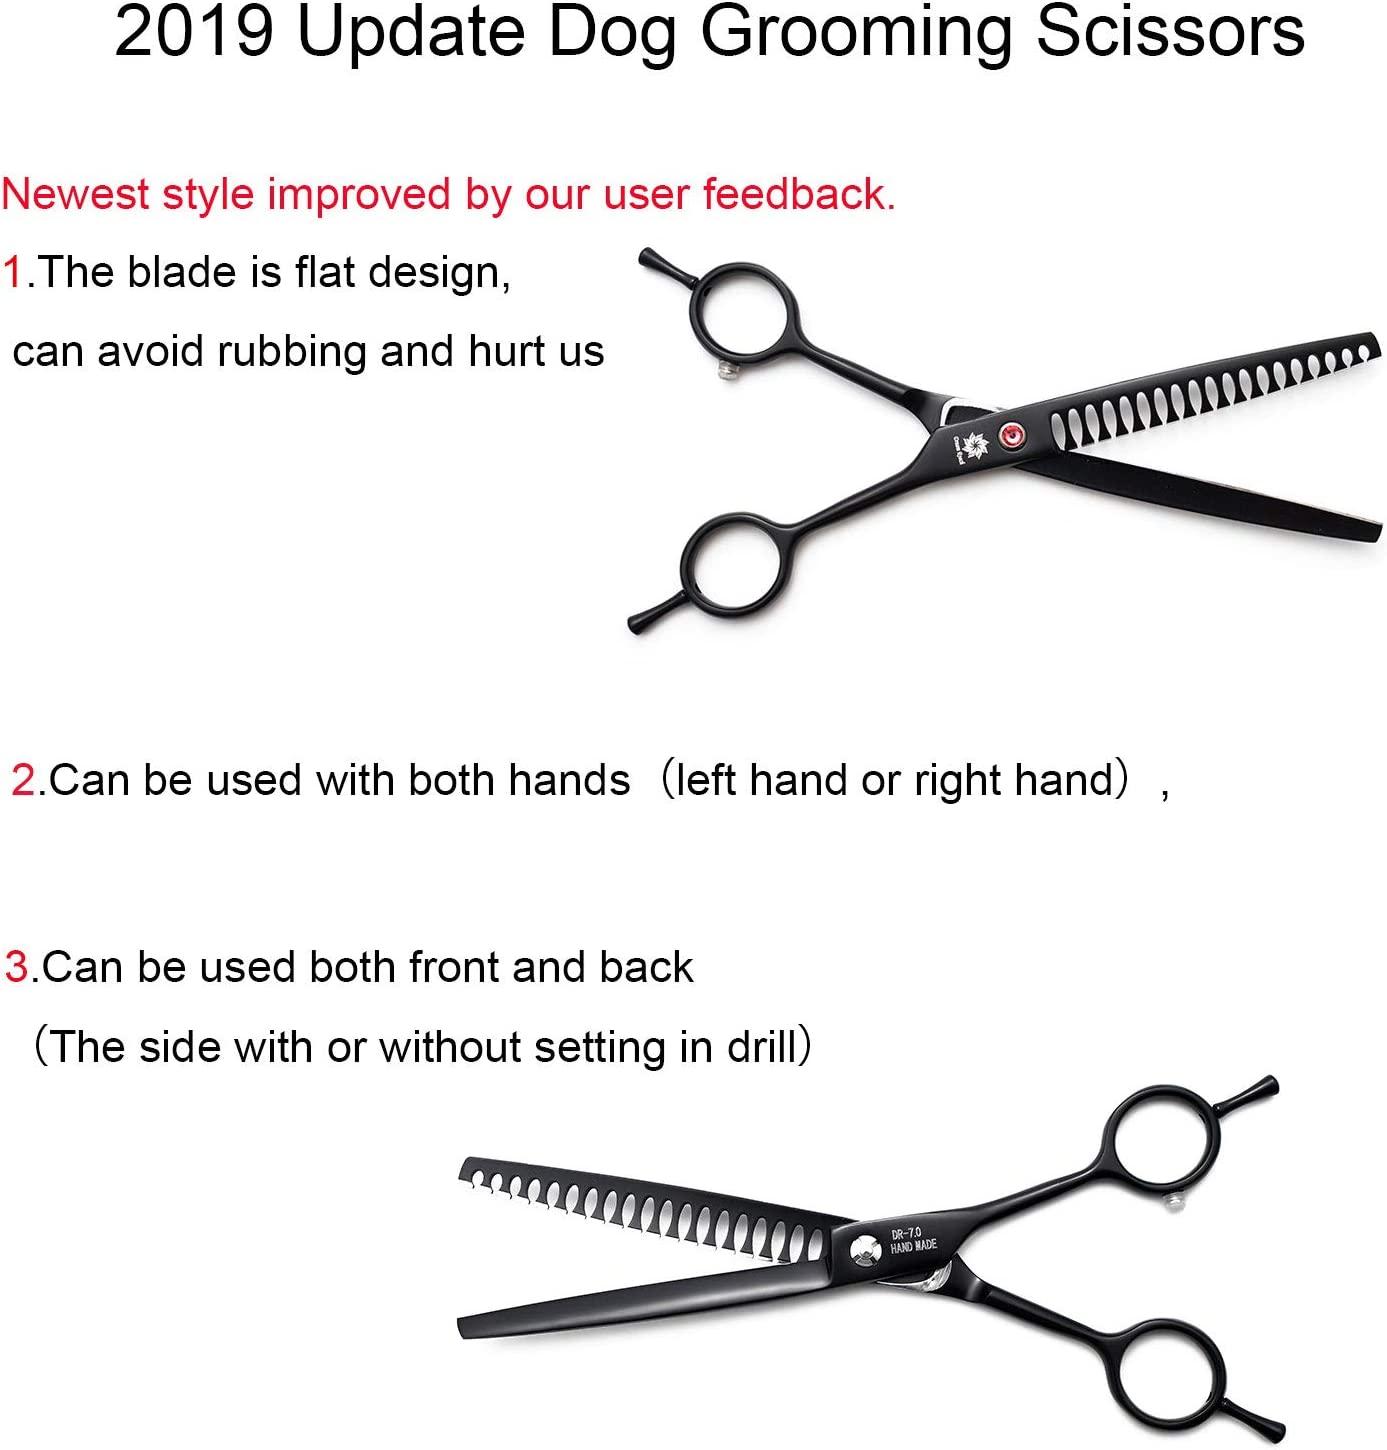 Professional Dog Grooming Shears (2 Pack)